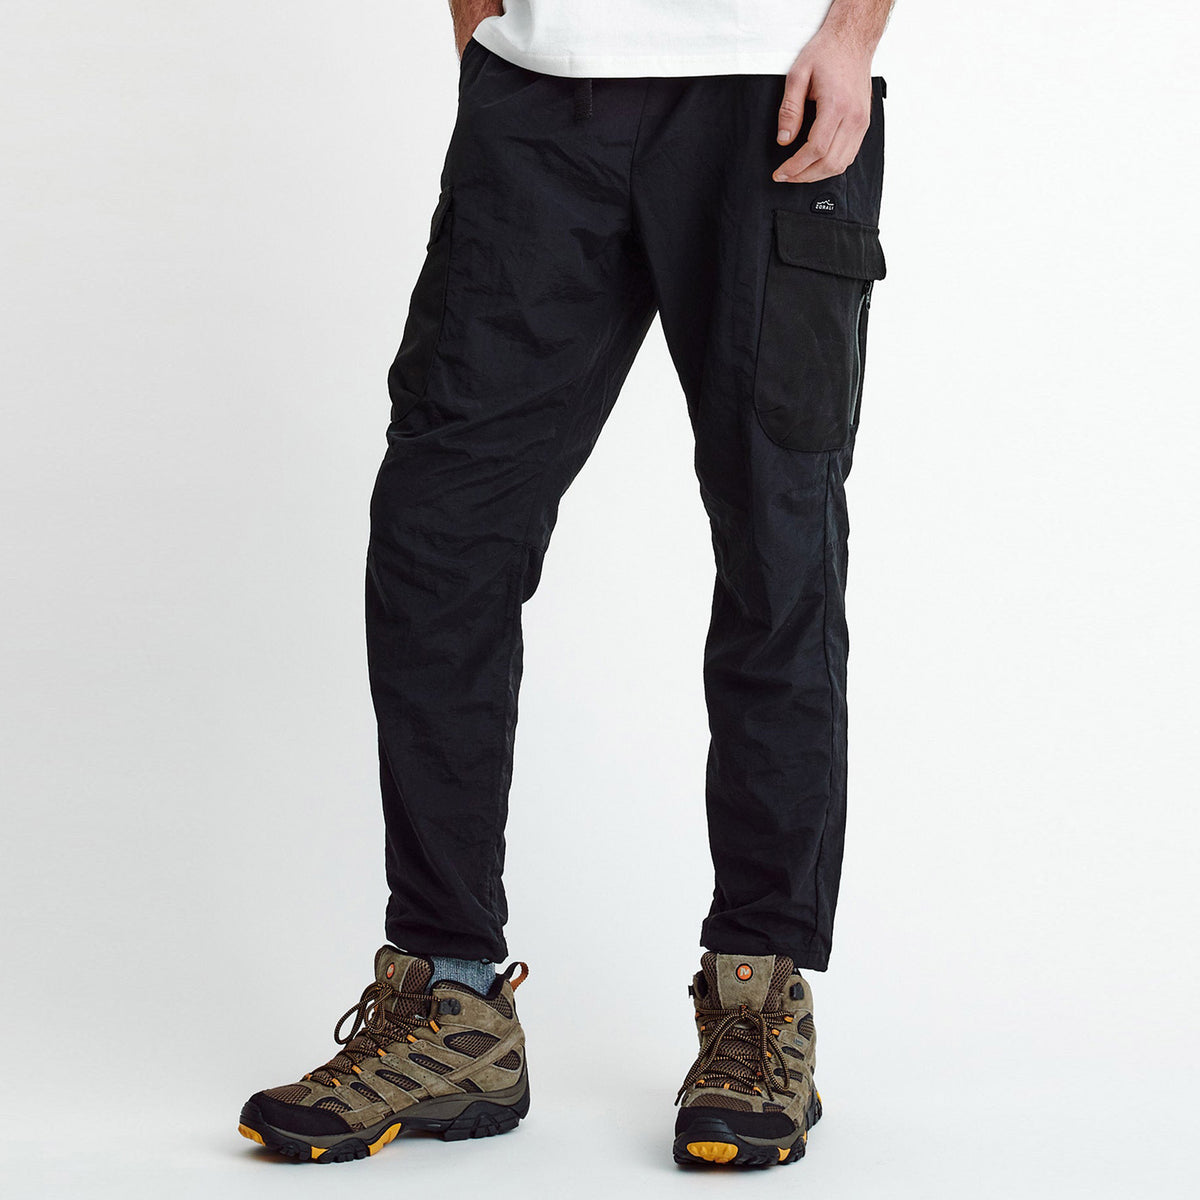 Big and Tall Cargo Pants: Durable and Versatile for Adventurers